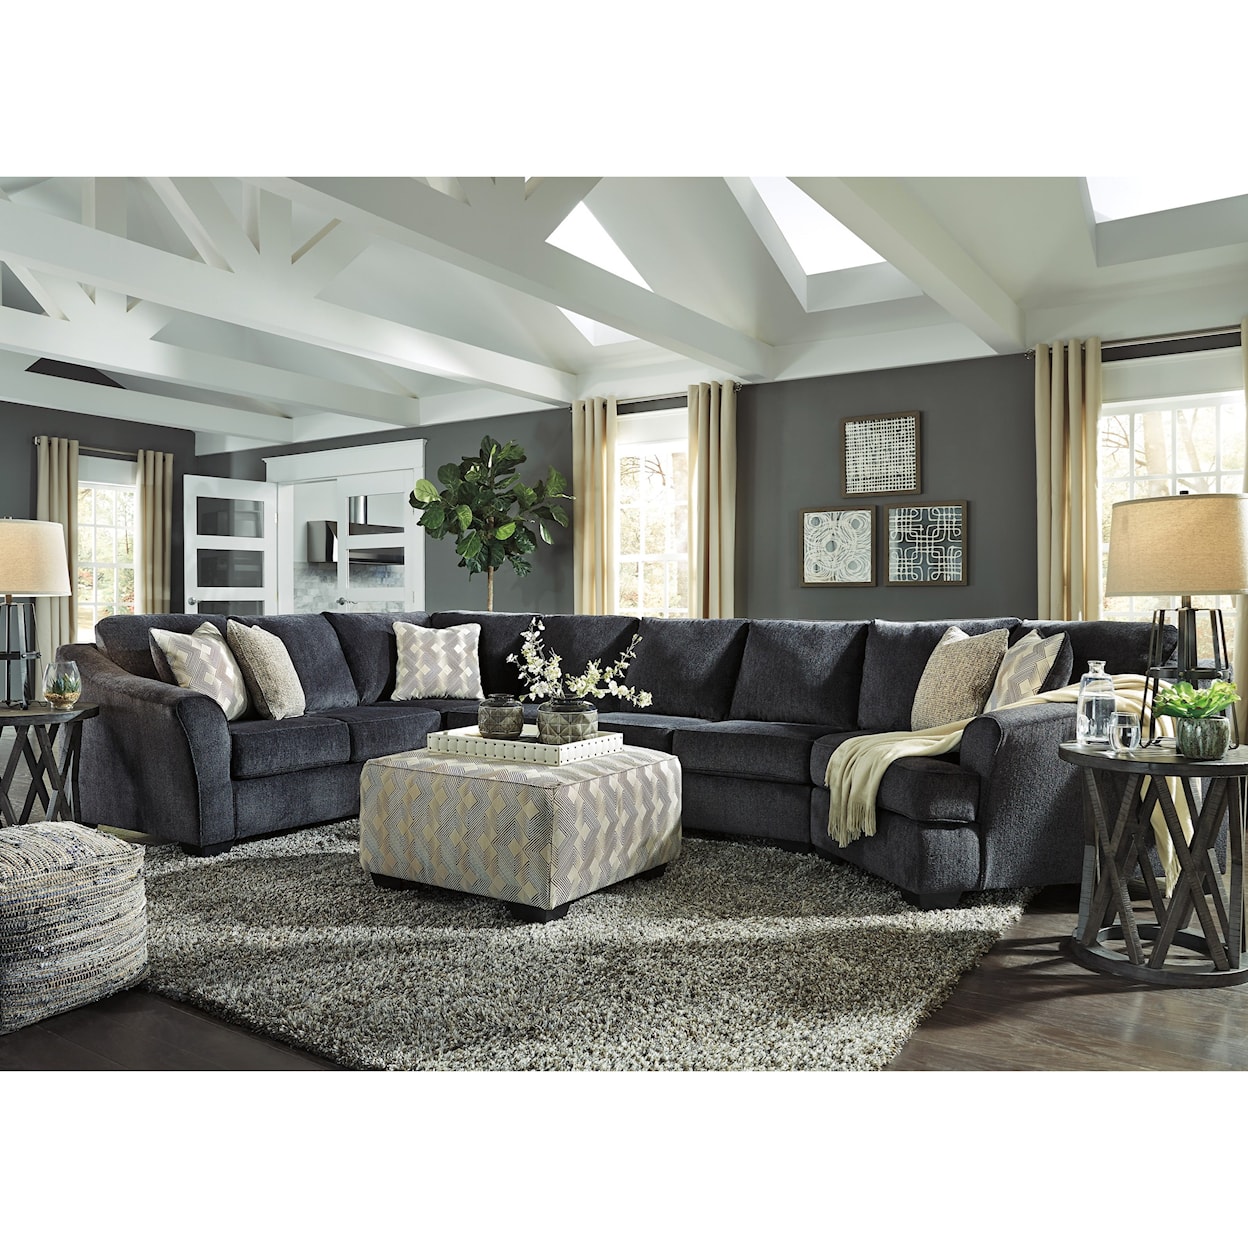 Signature Design by Ashley Furniture Eltmann 4-Piece Sectional with Right Cuddler